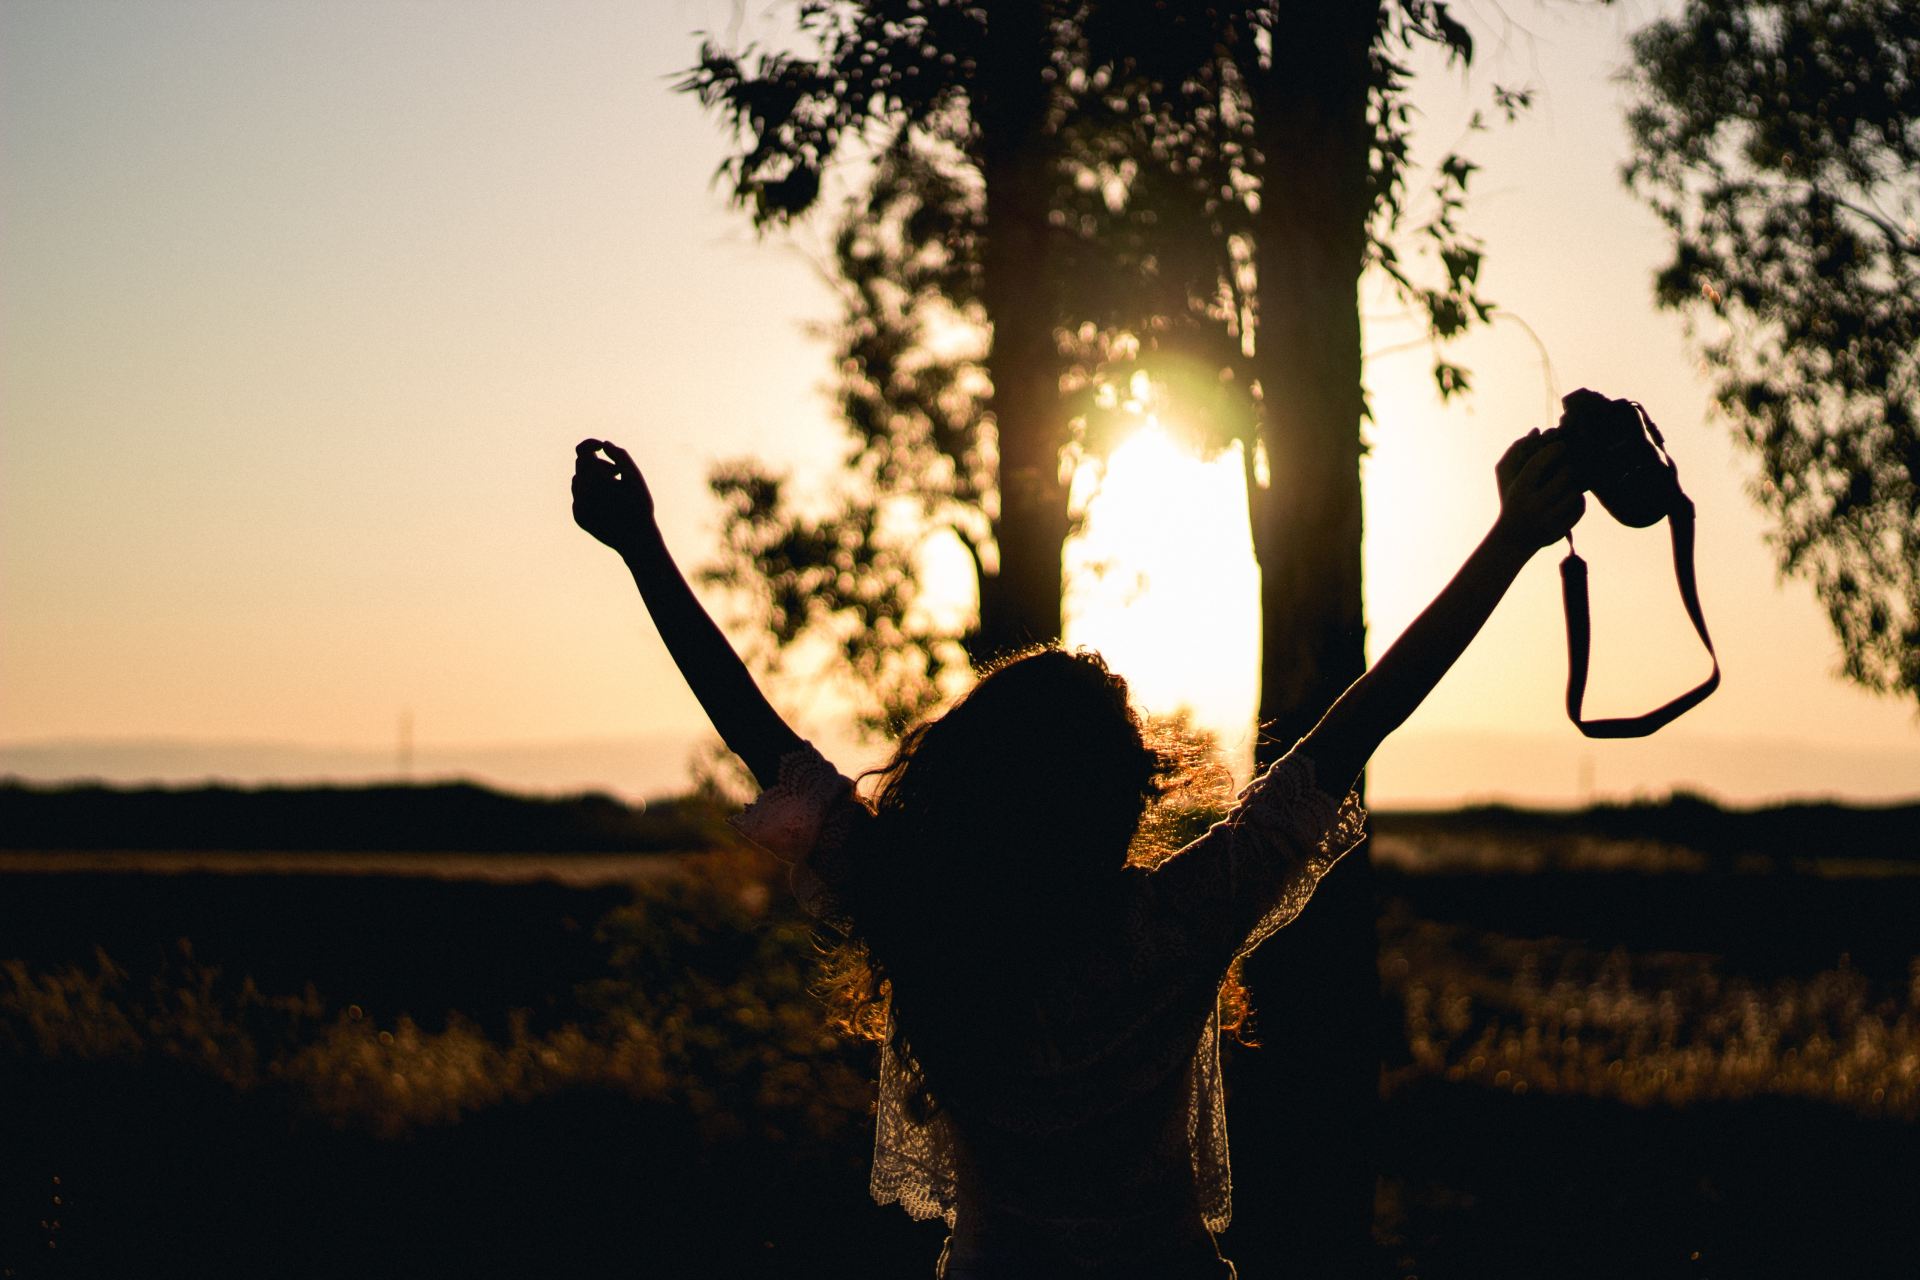 silhouette photo of woman raising her hands while holding DSLR camera